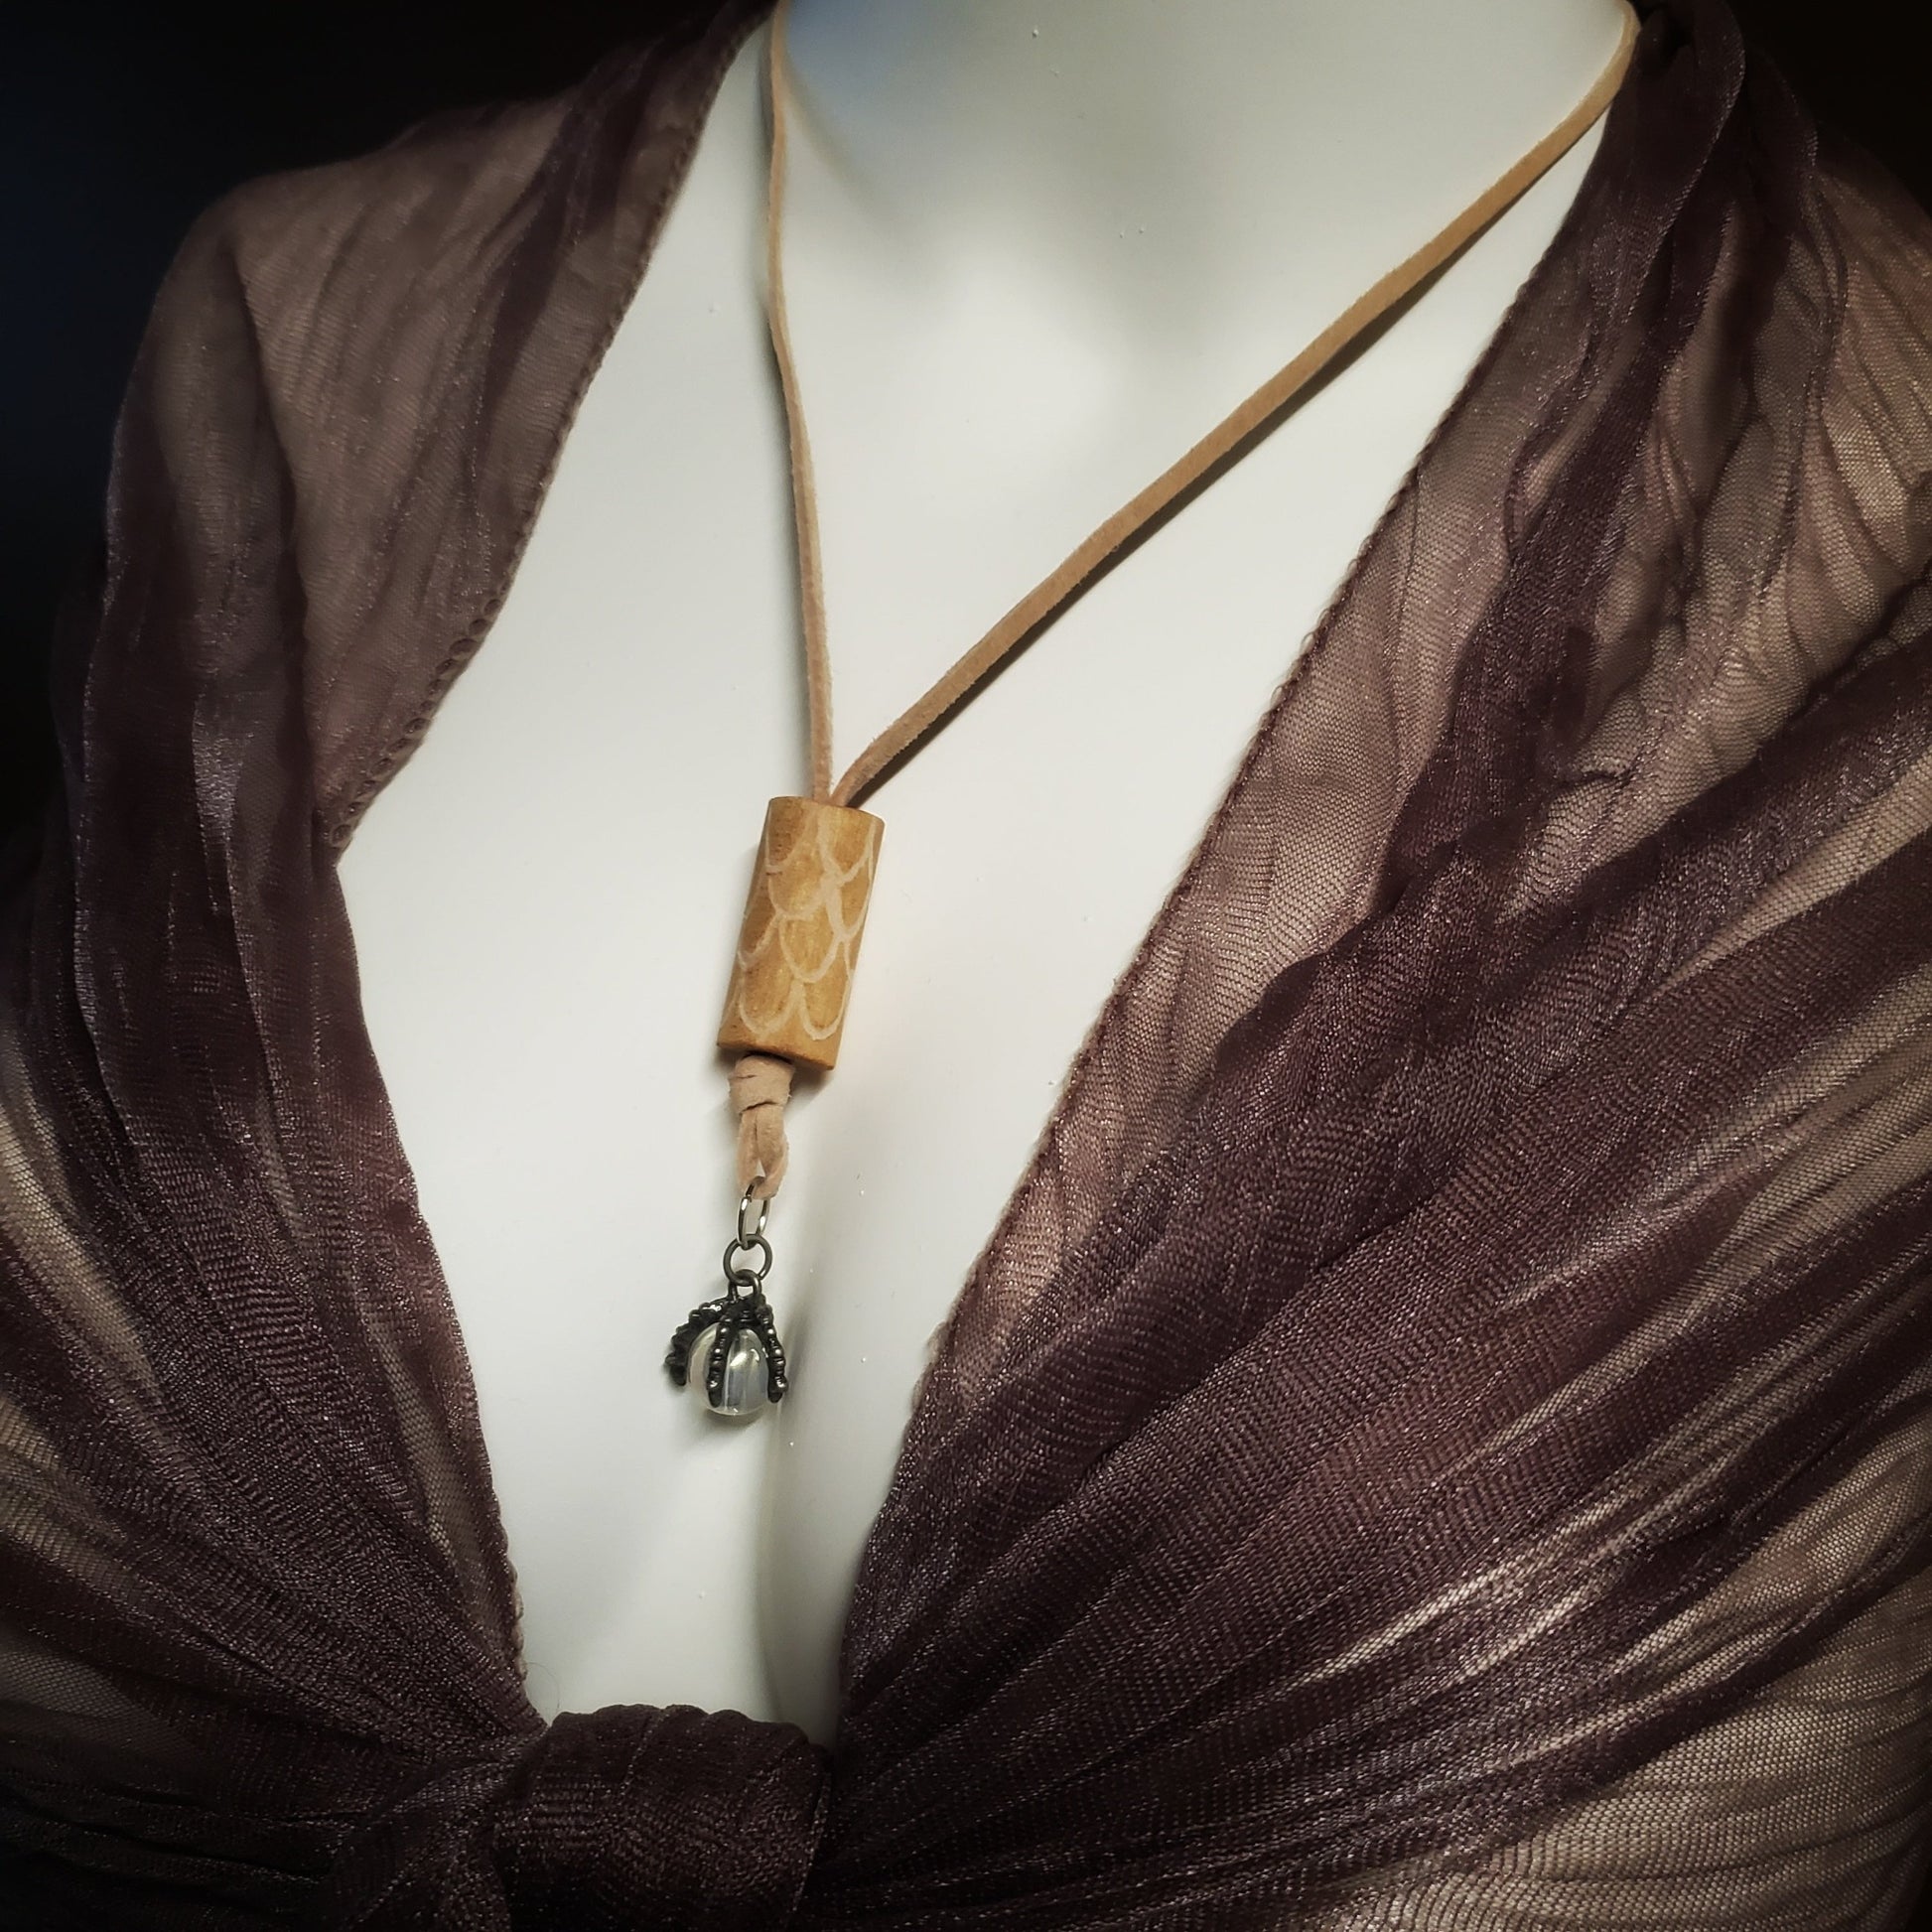 necklace made from a piece of upcycled drumstick on which dragon scales are etched under the drumstick a silver coloured dragon claw pendant holds a clear bead - a beige swede cord holds the pendant - the necklace hangs on the neck of a white mannequin bust wearing a sheer wrap